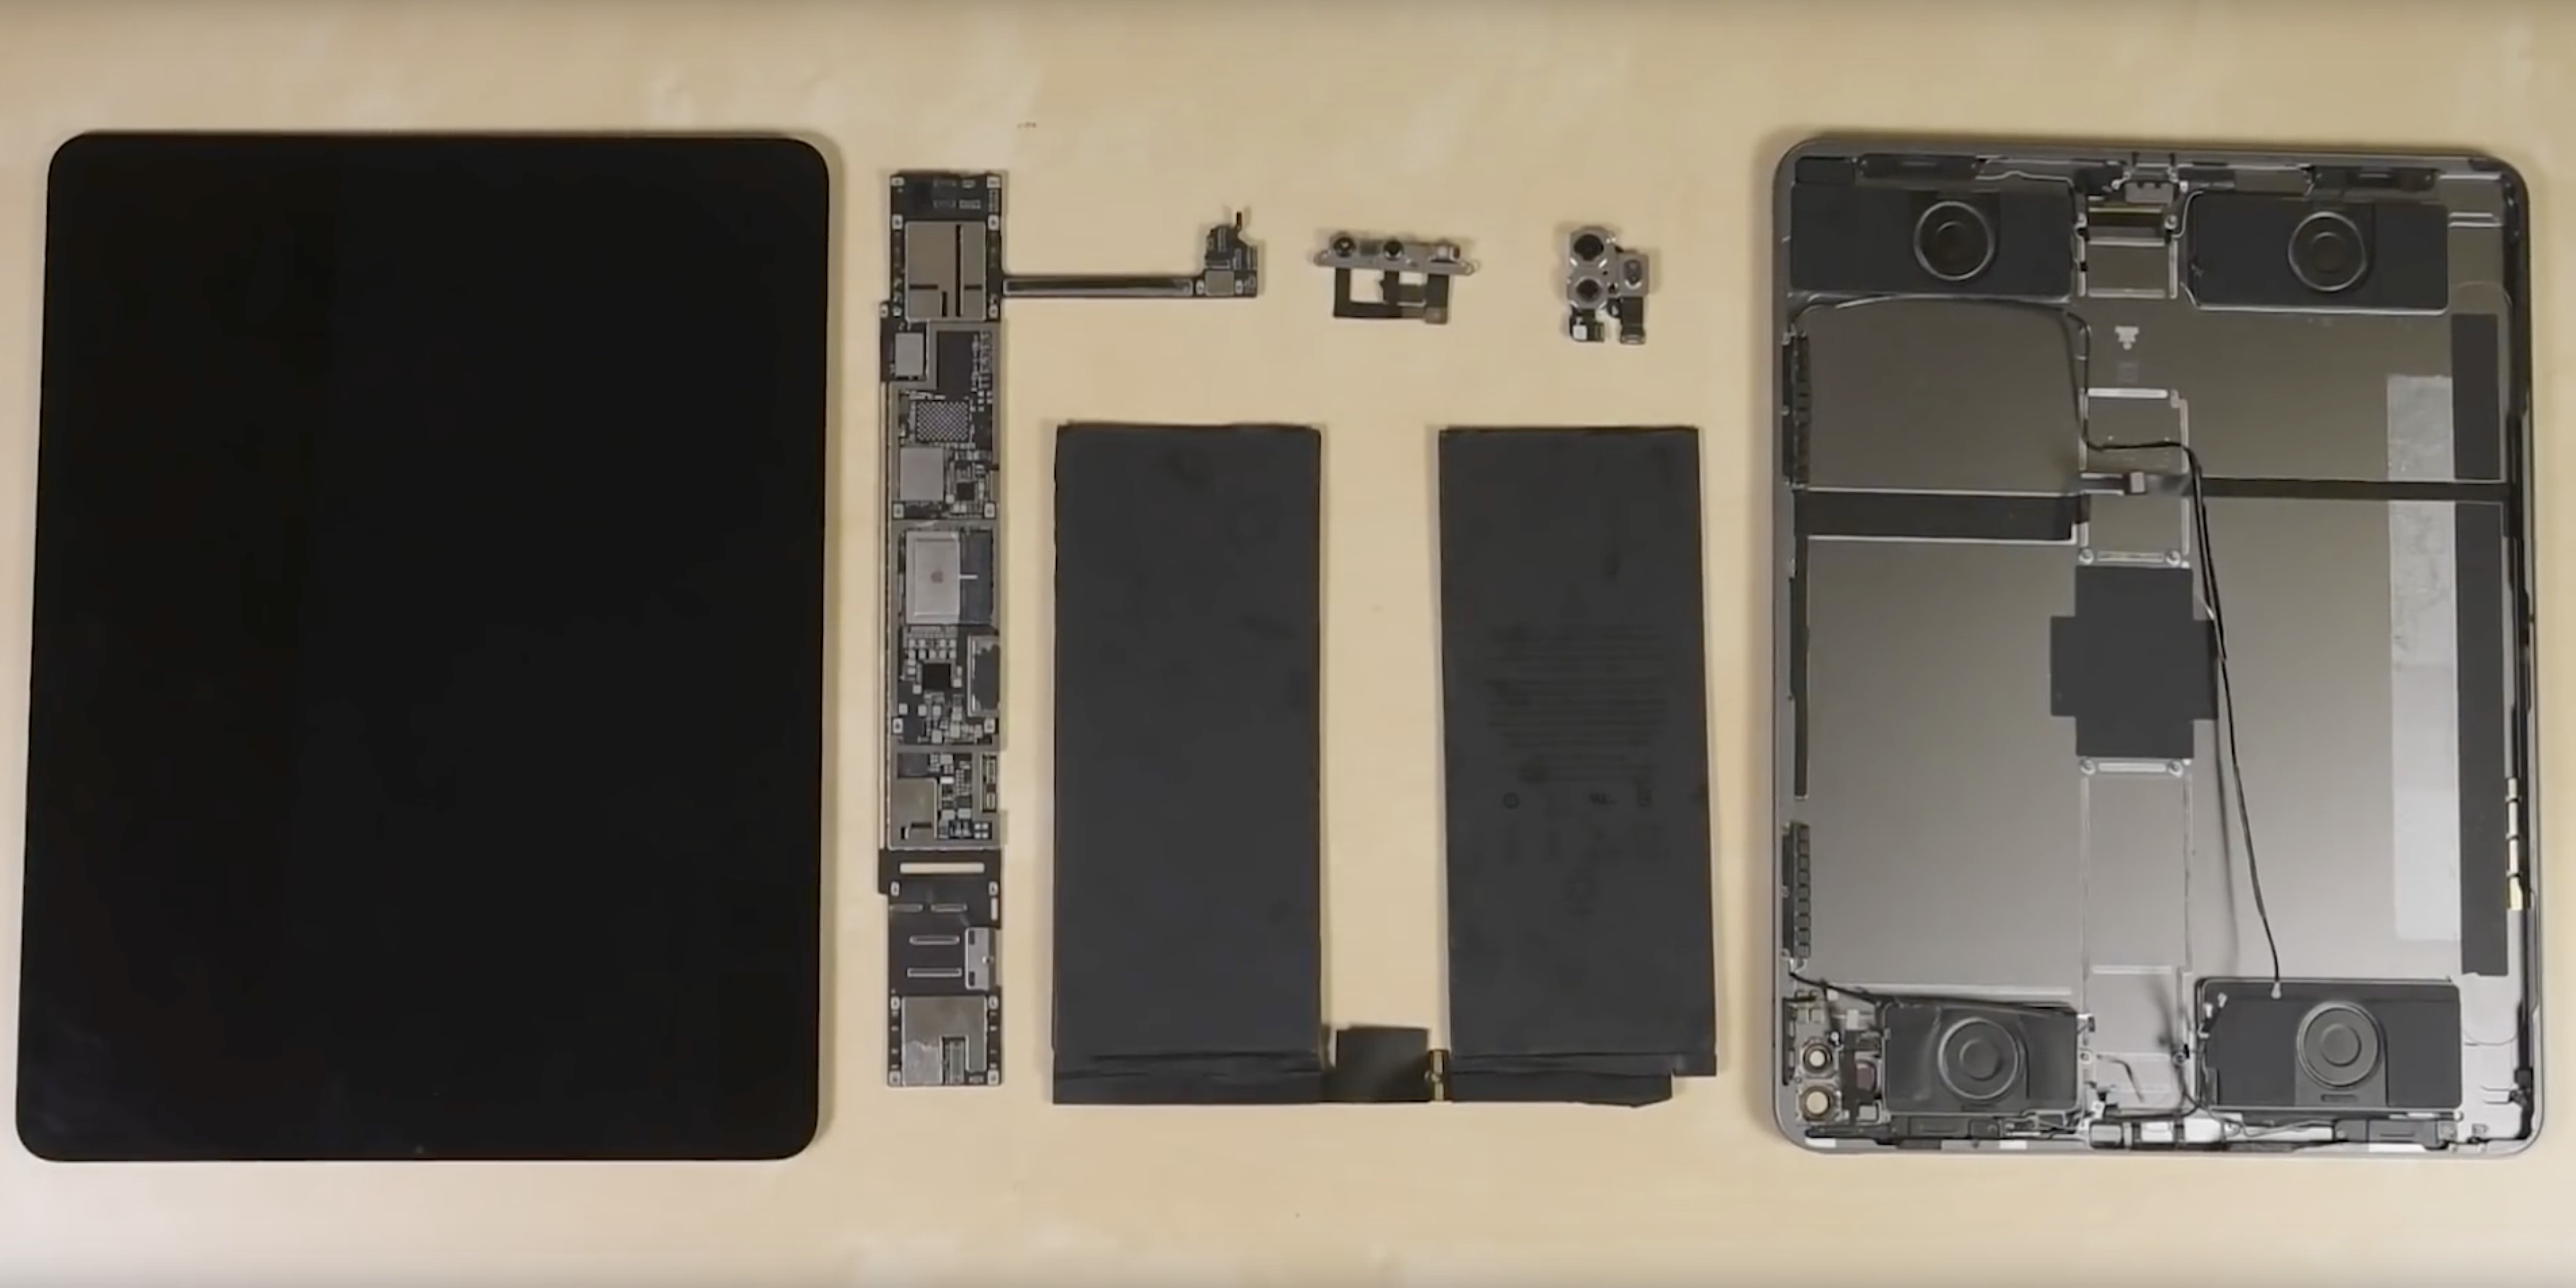 Video: iFixit tears down the new 2020 iPad Pro and LiDAR Scanner - 9to5Mac